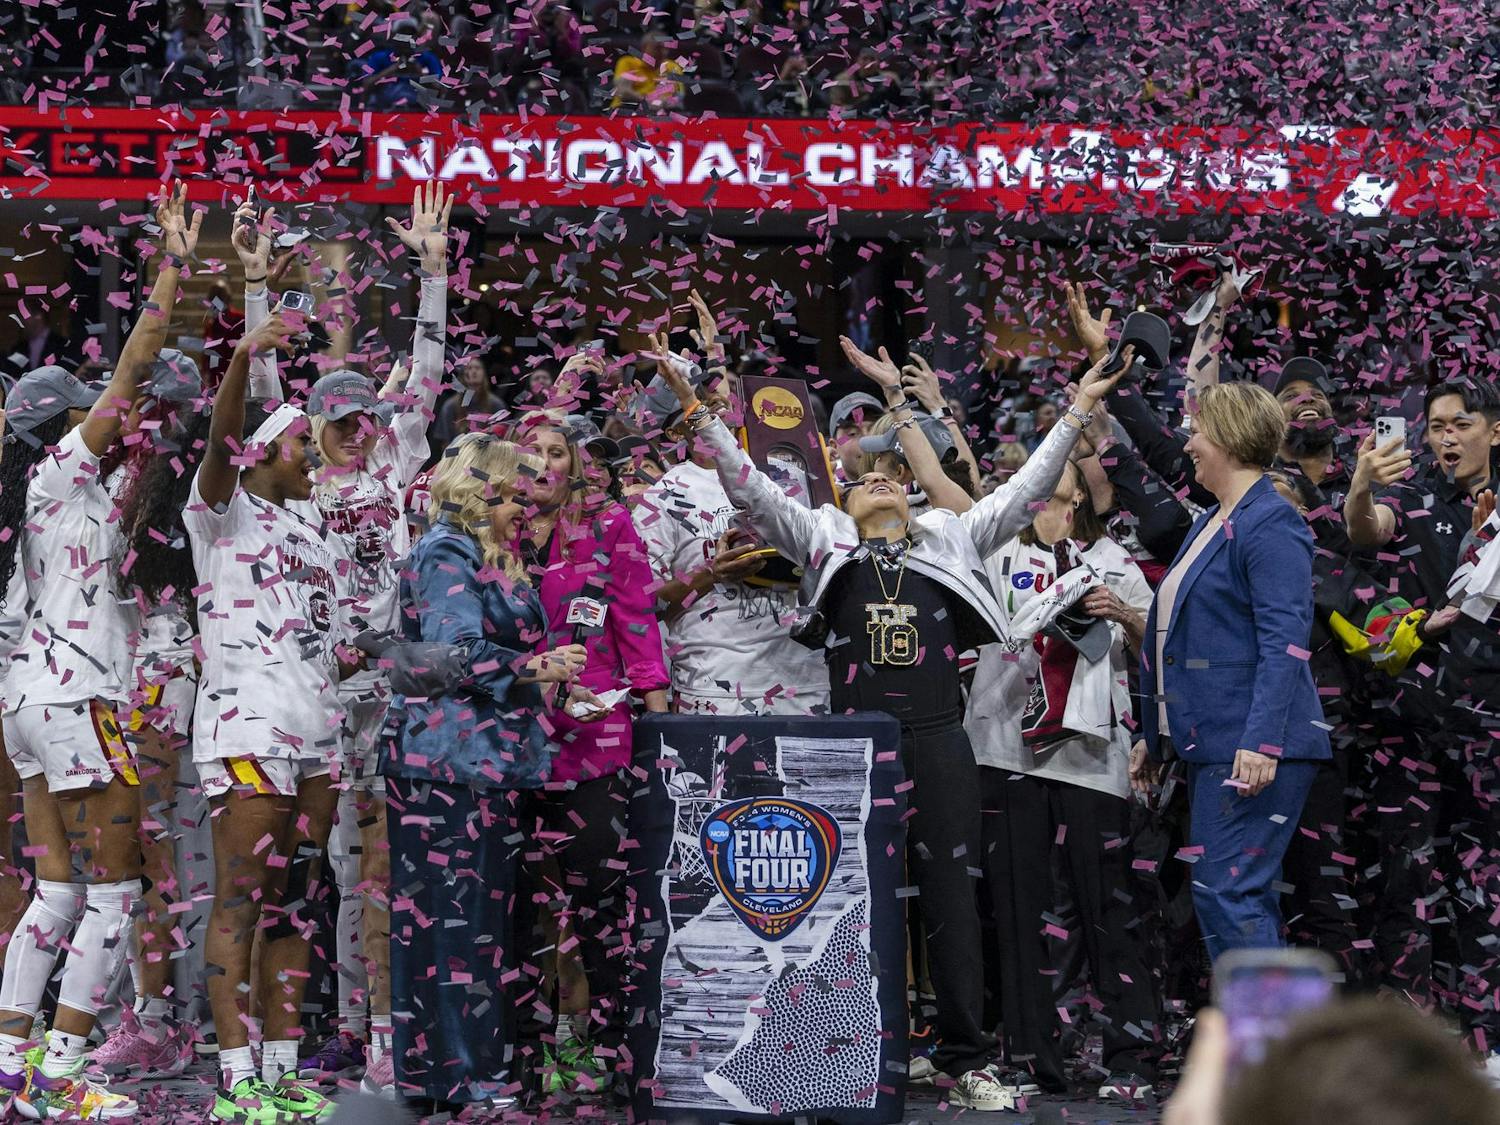 Confetti falls as the Gamecock women's basketball team celebrates earning a national title on stage in Rocket Mortgage FieldHouse. This victory completed the "revenge tour" and an undefeated season for the Gamecocks.